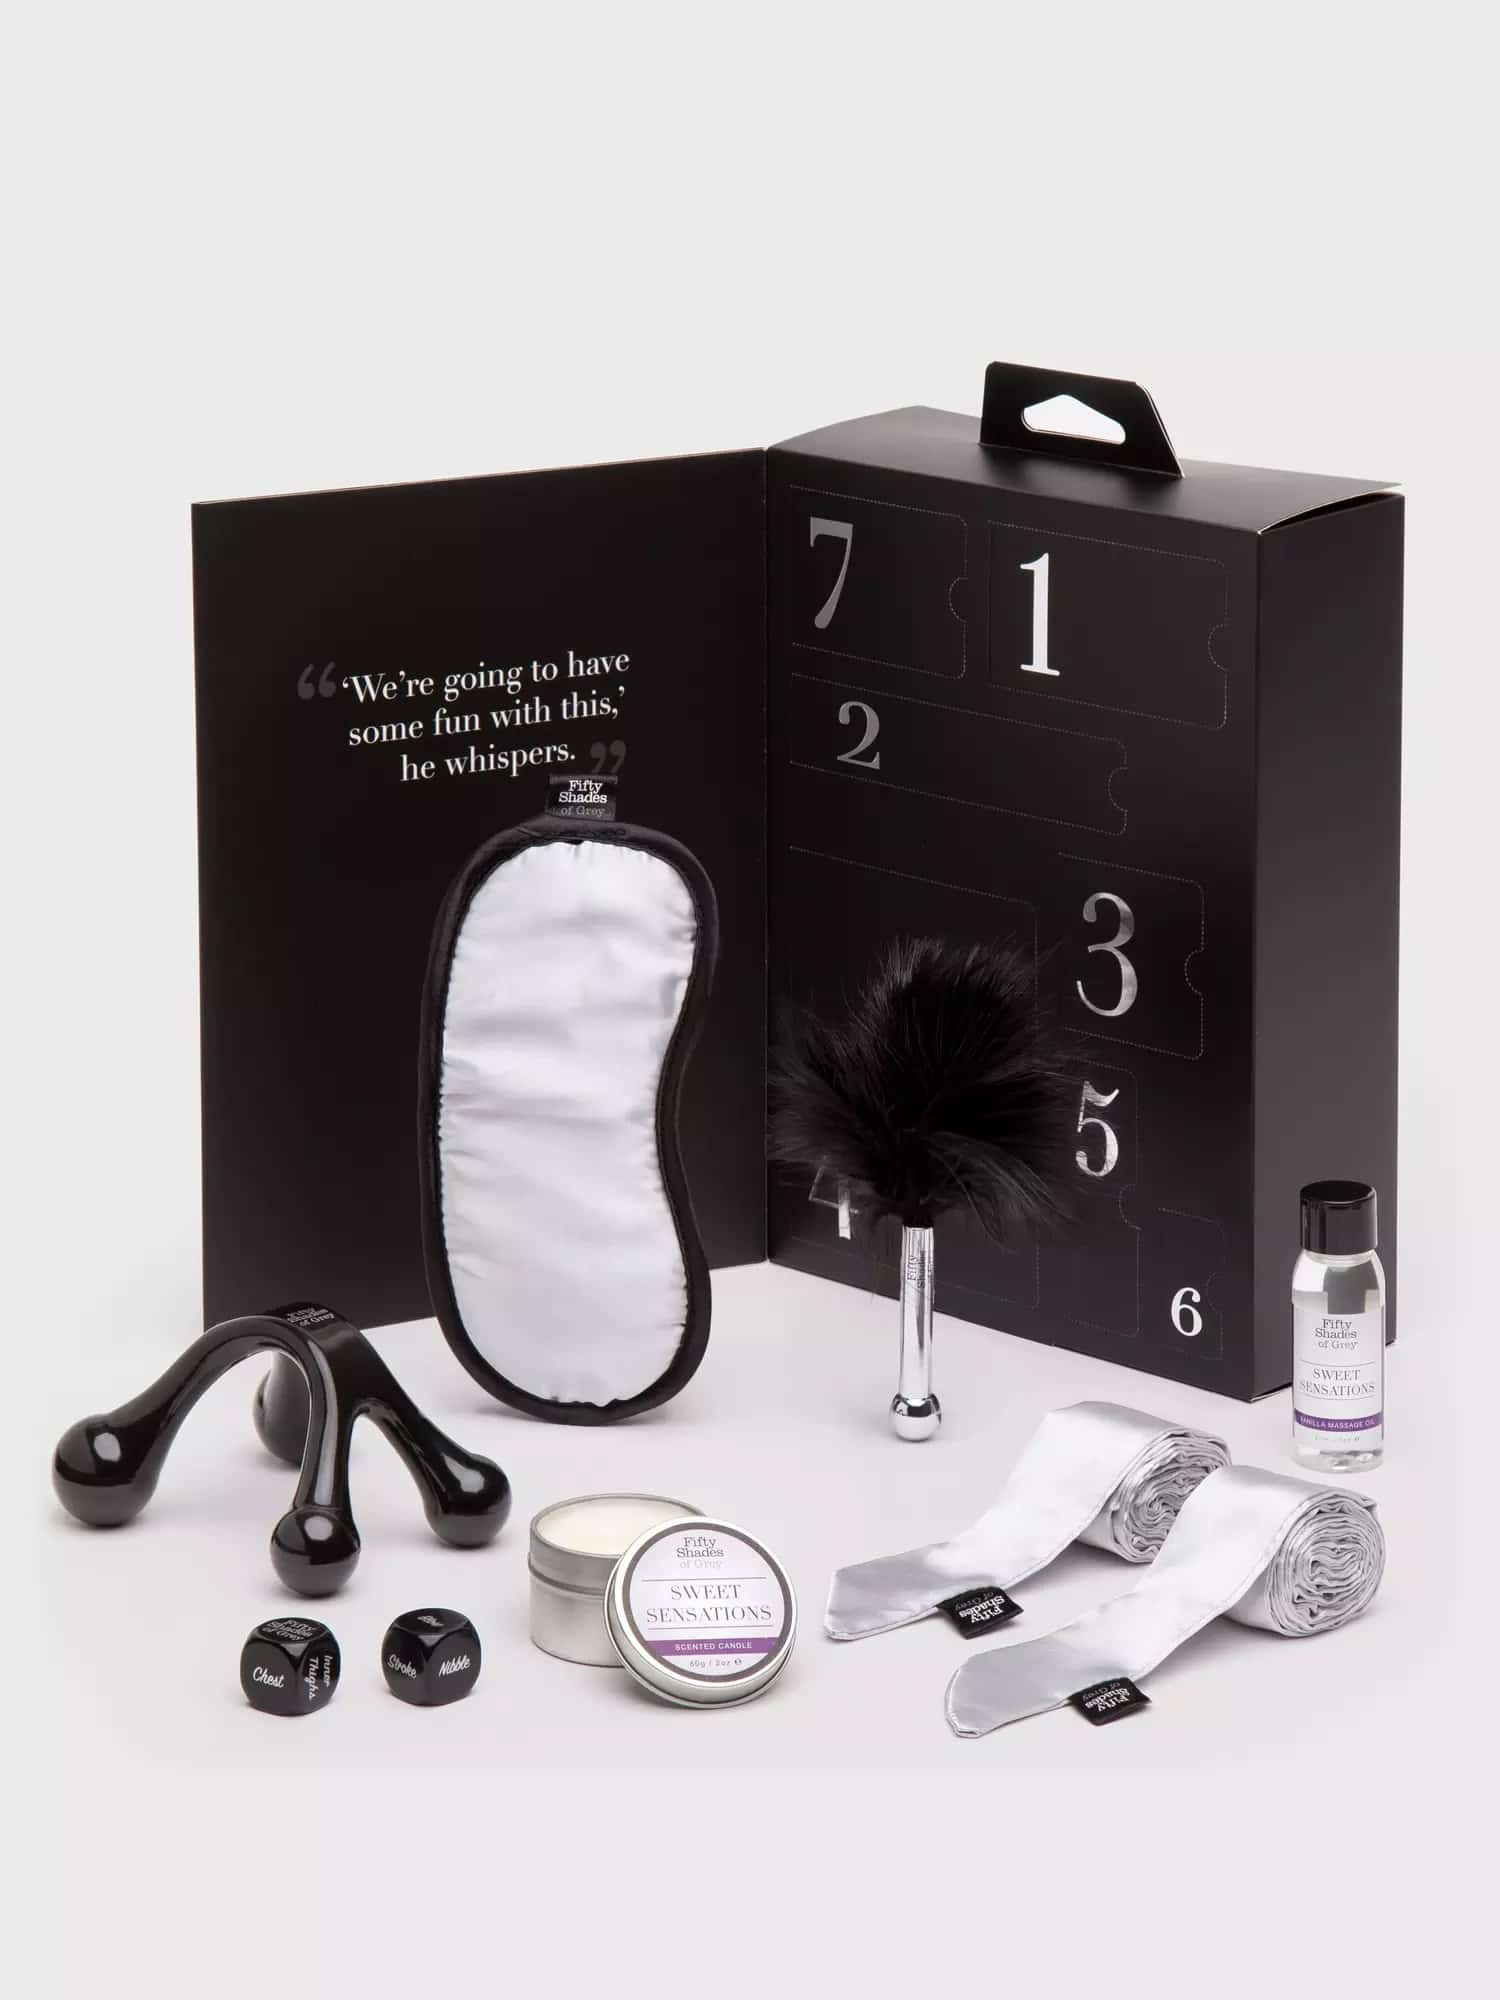 Compare Fifty Shades of Grey Sweet Sensations Set